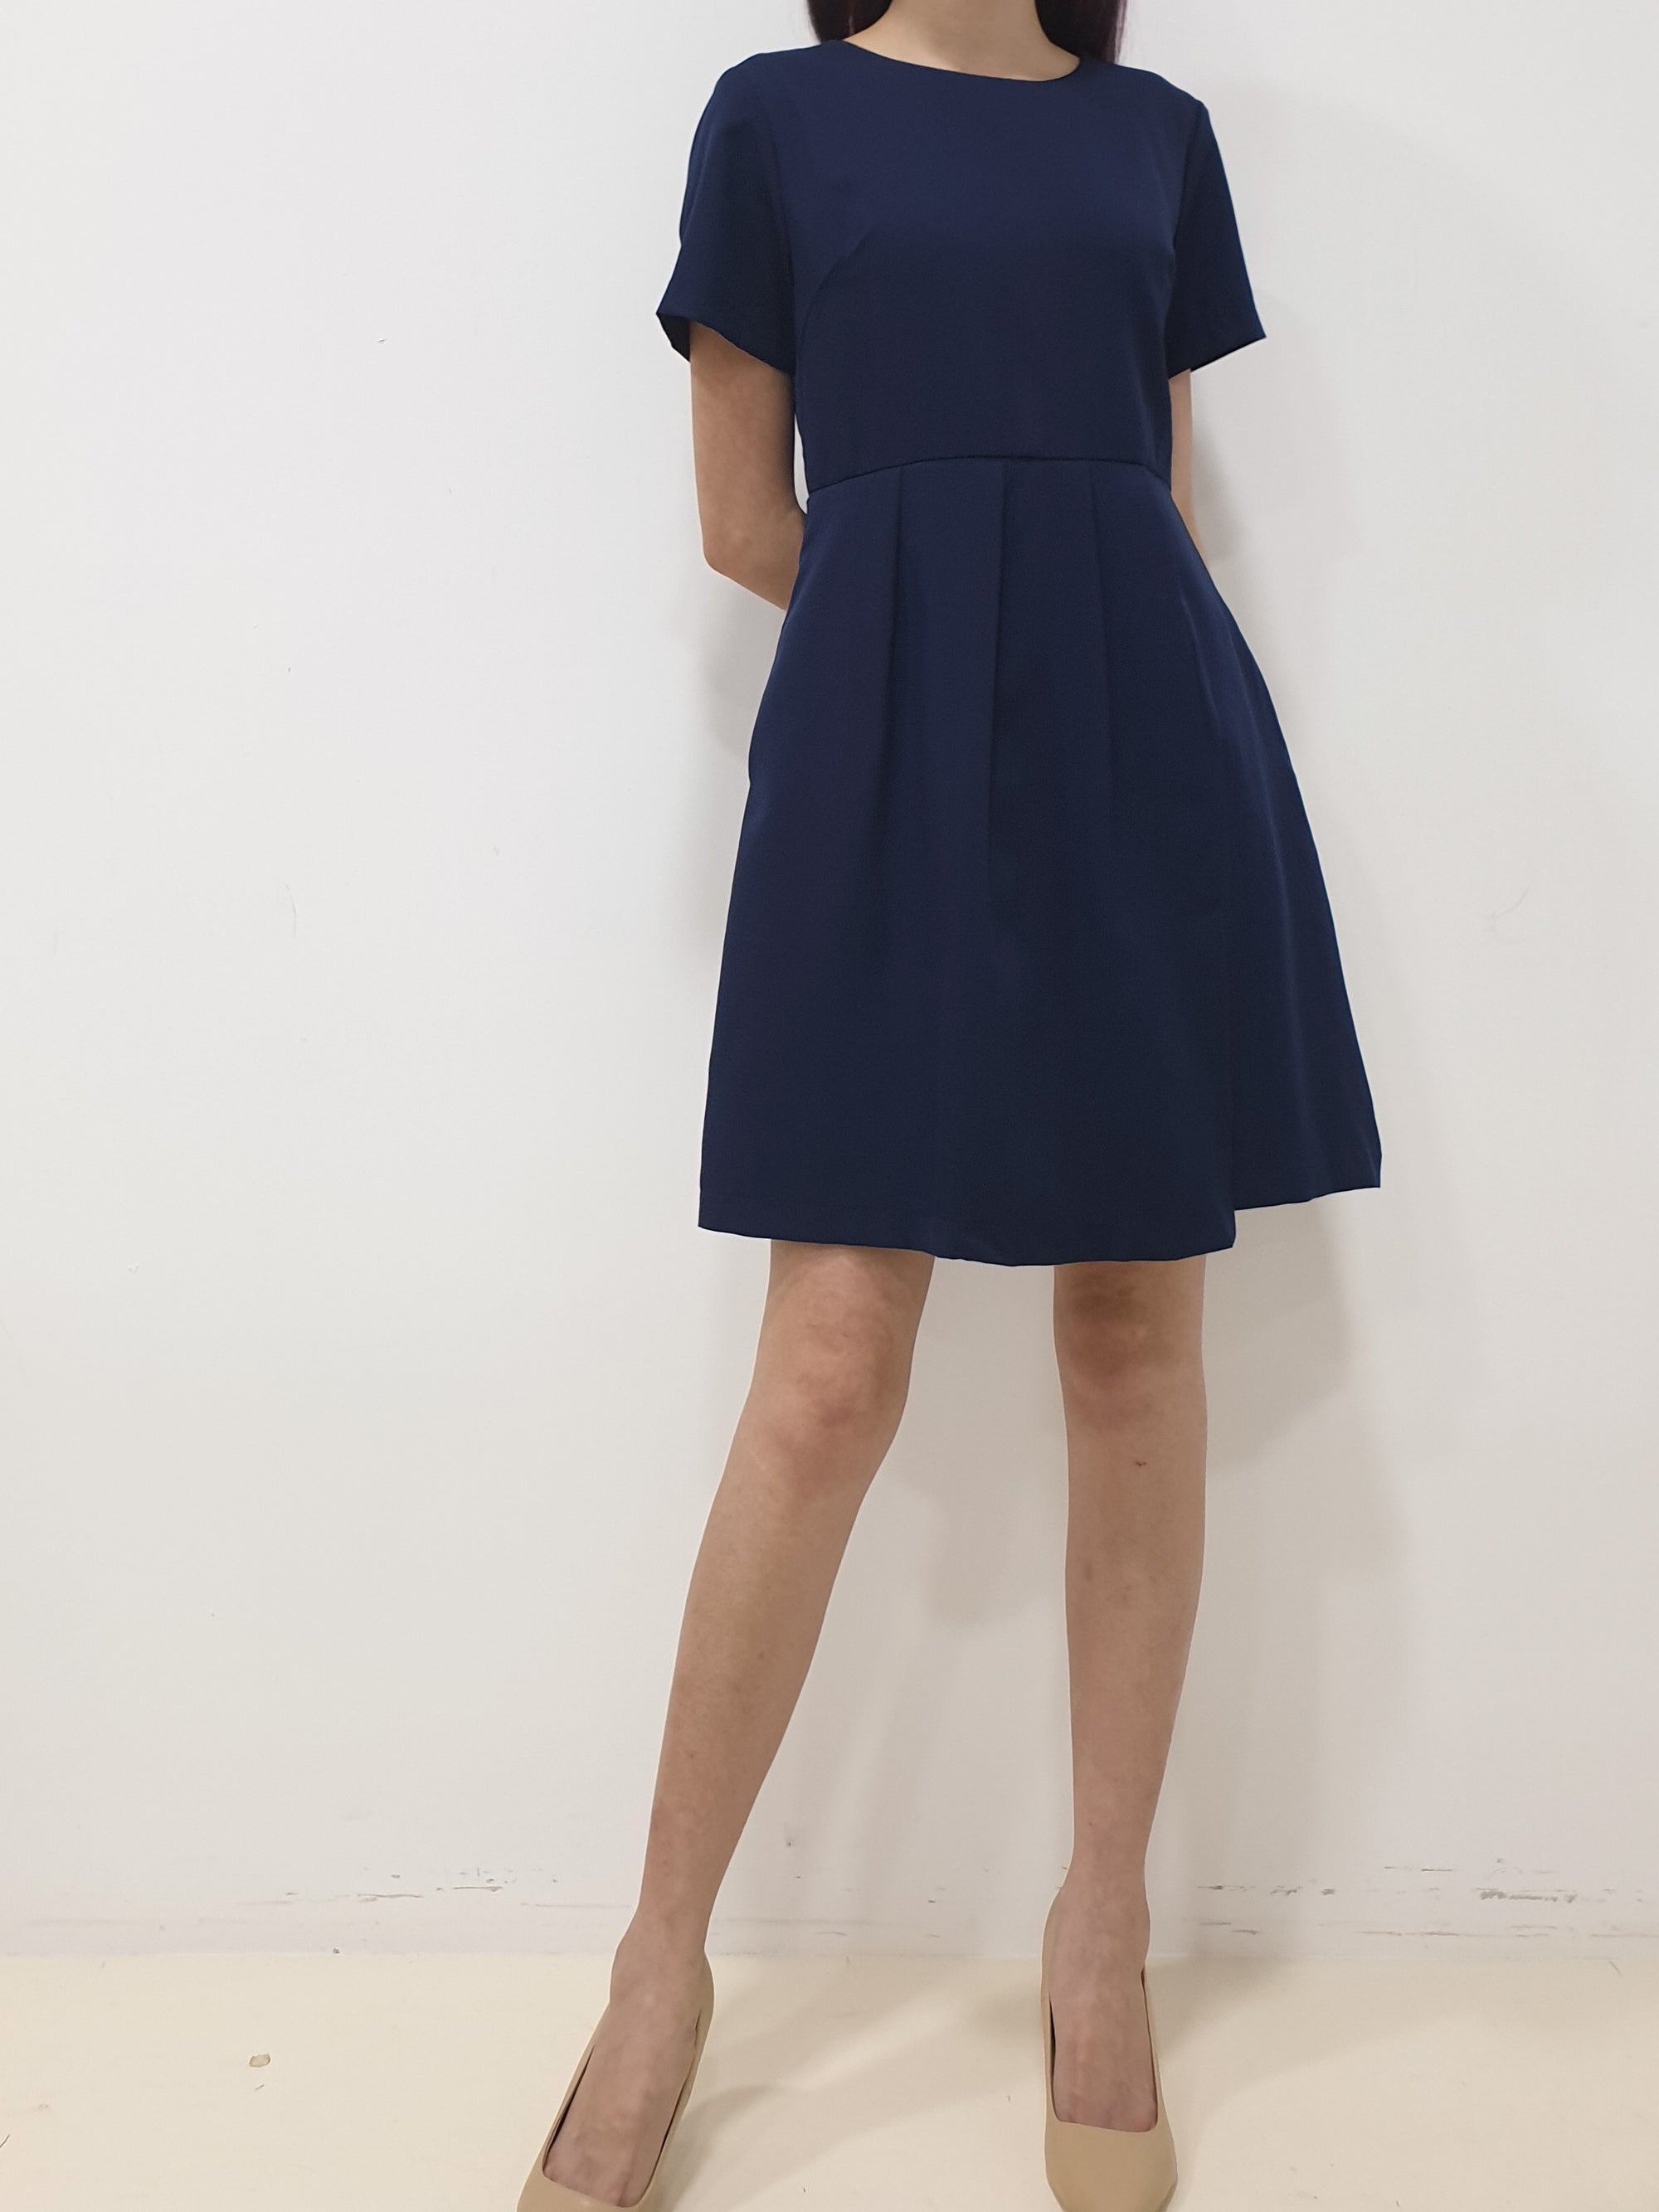 Folded Flap Sleeved Dress (Non-returnable) - Ferlicious